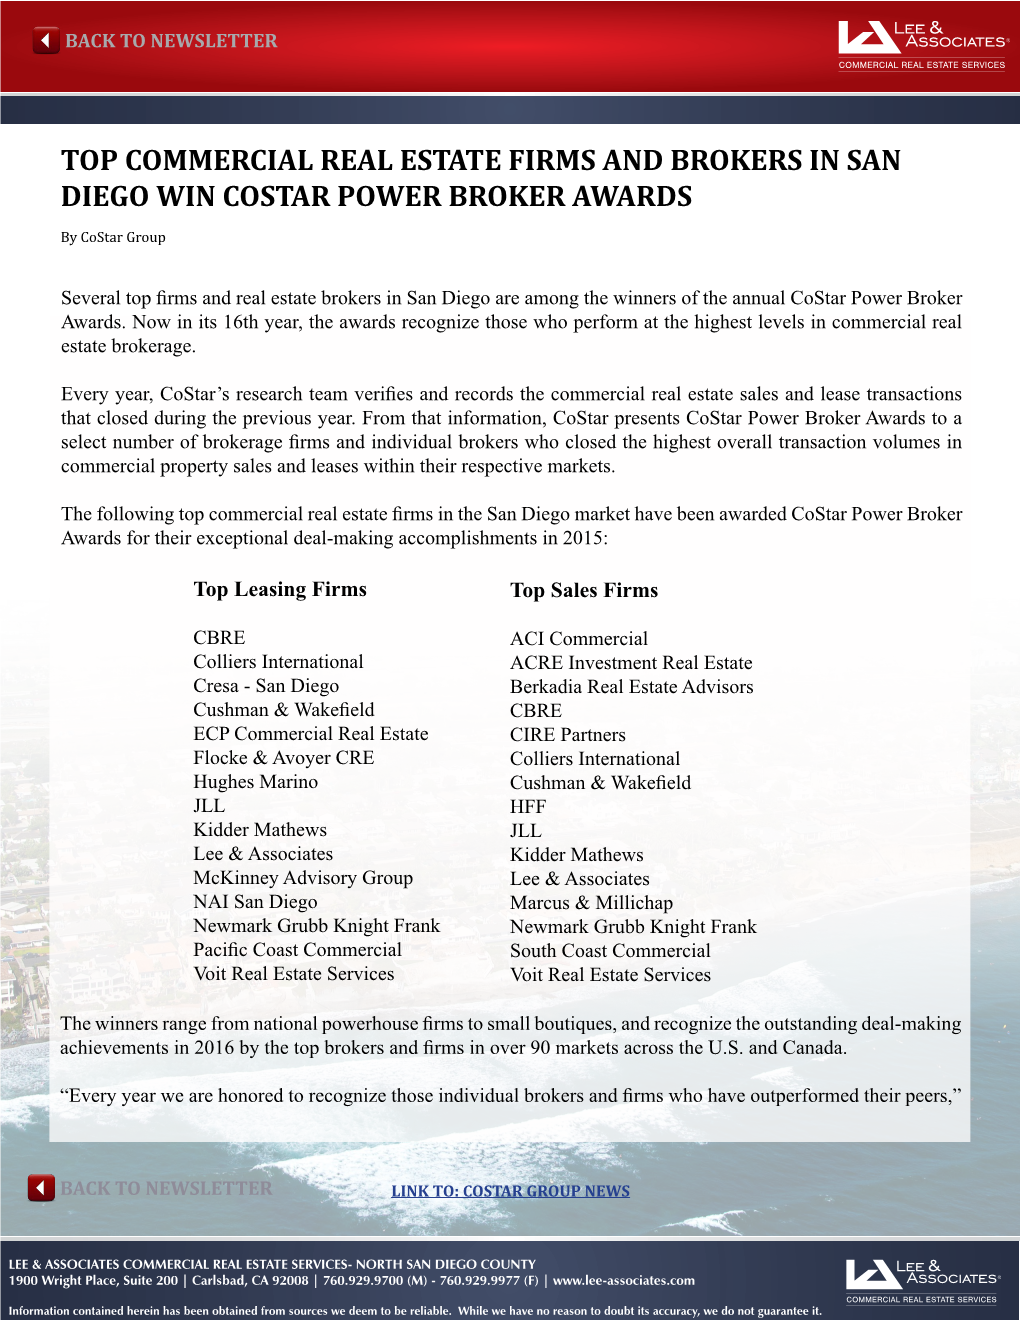 Top Commercial Real Estate Firms and Brokers in San Diego Win Costar Power Broker Awards